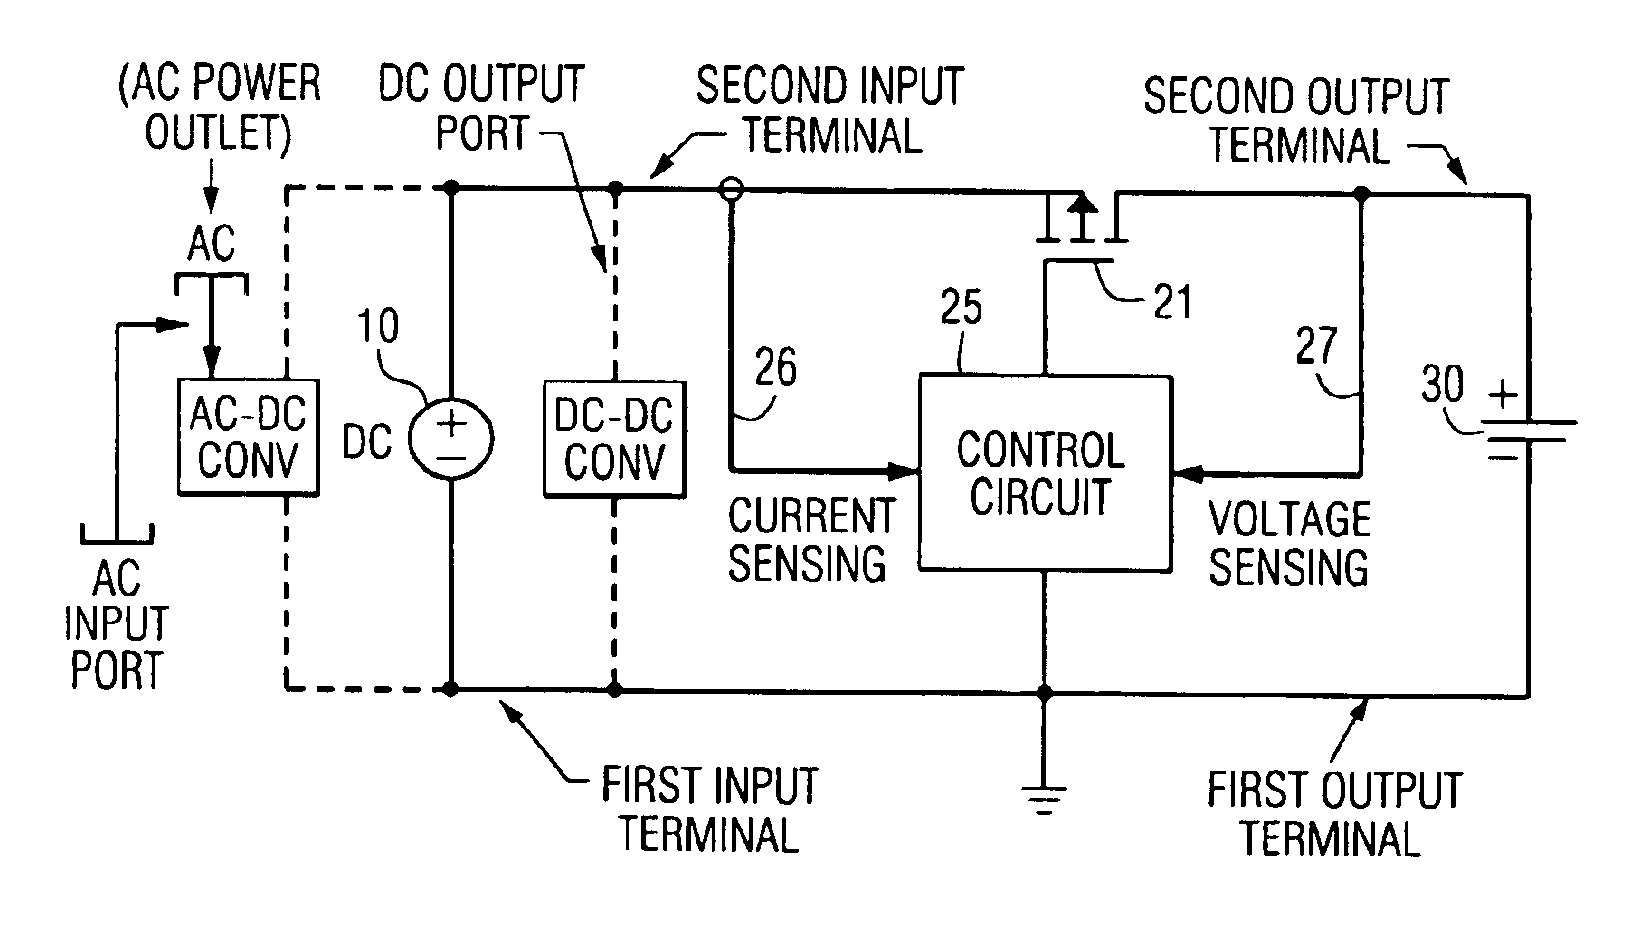 Li-ion/Li-polymer battery charger configured to be DC-powered from multiple types of wall adapters